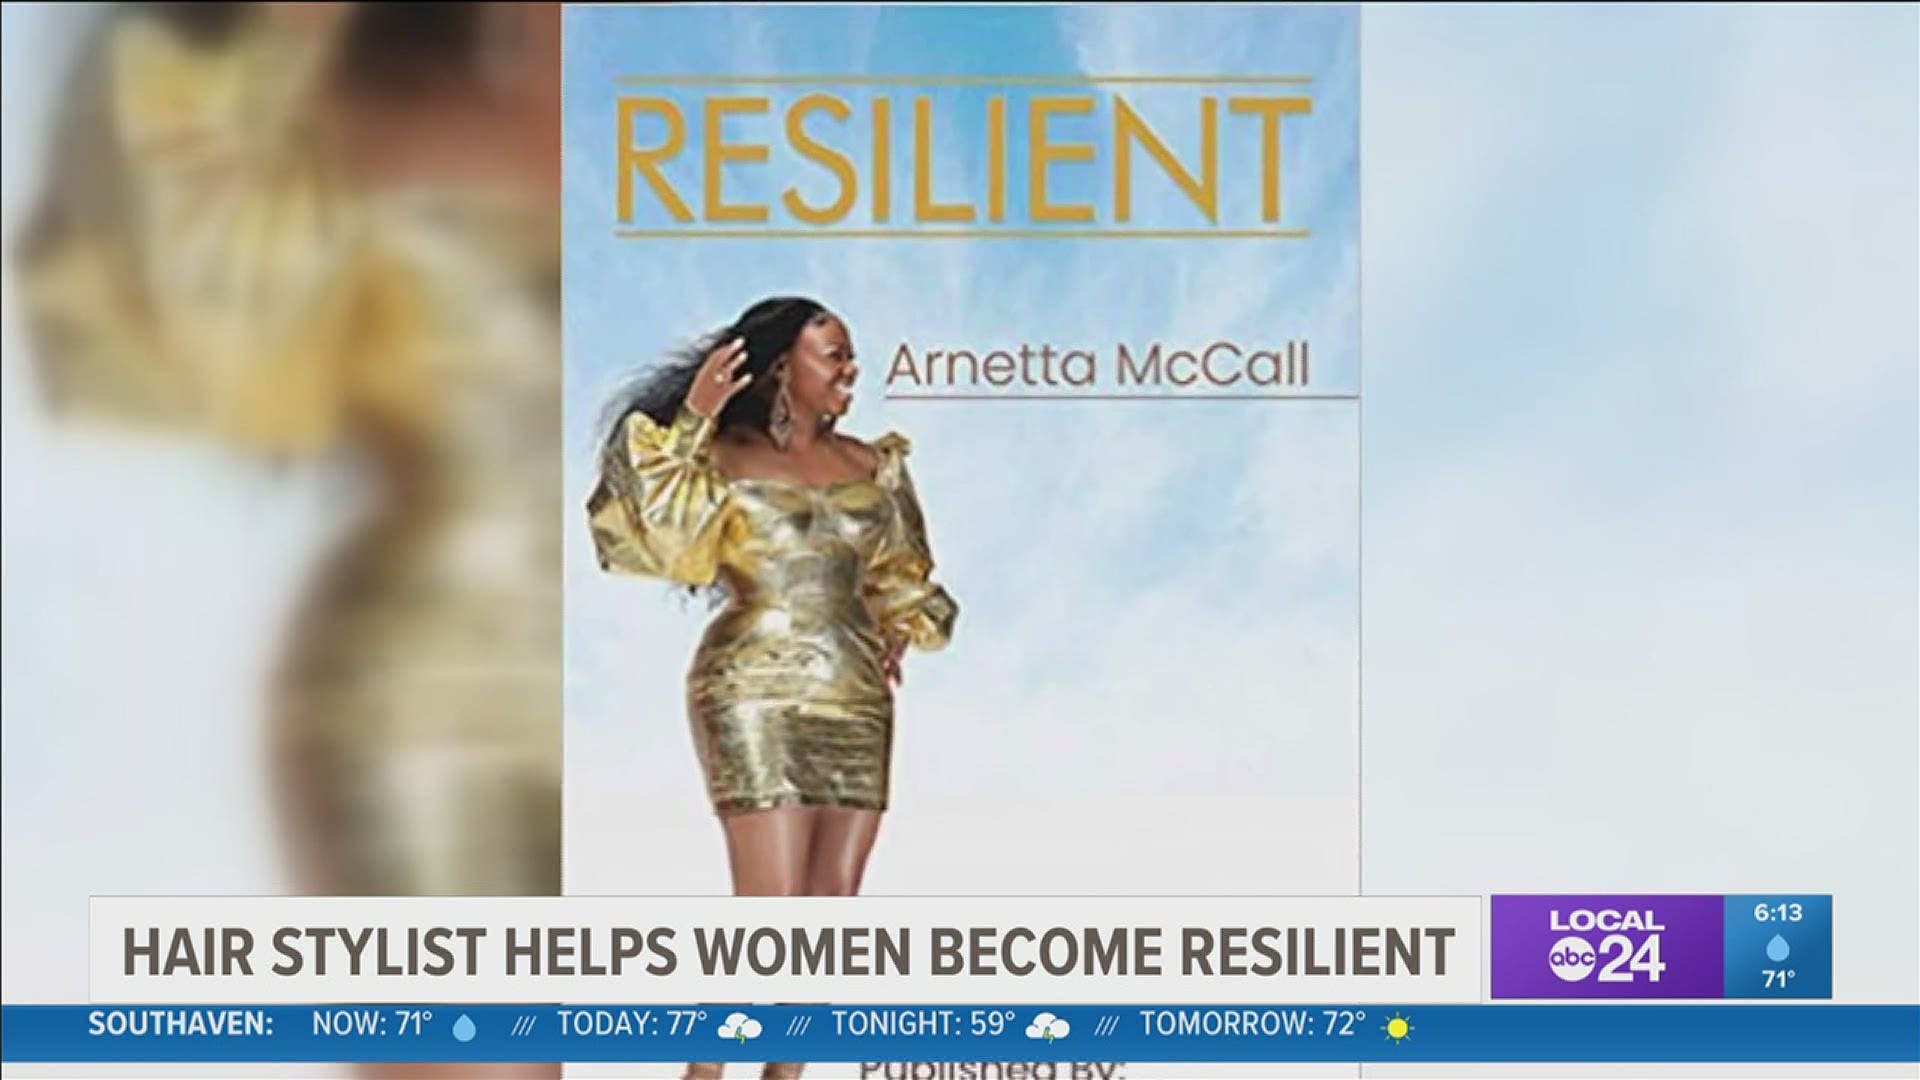 "It's okay to seek counseling once you go through mental health issues," said Author Arnetta McCall.